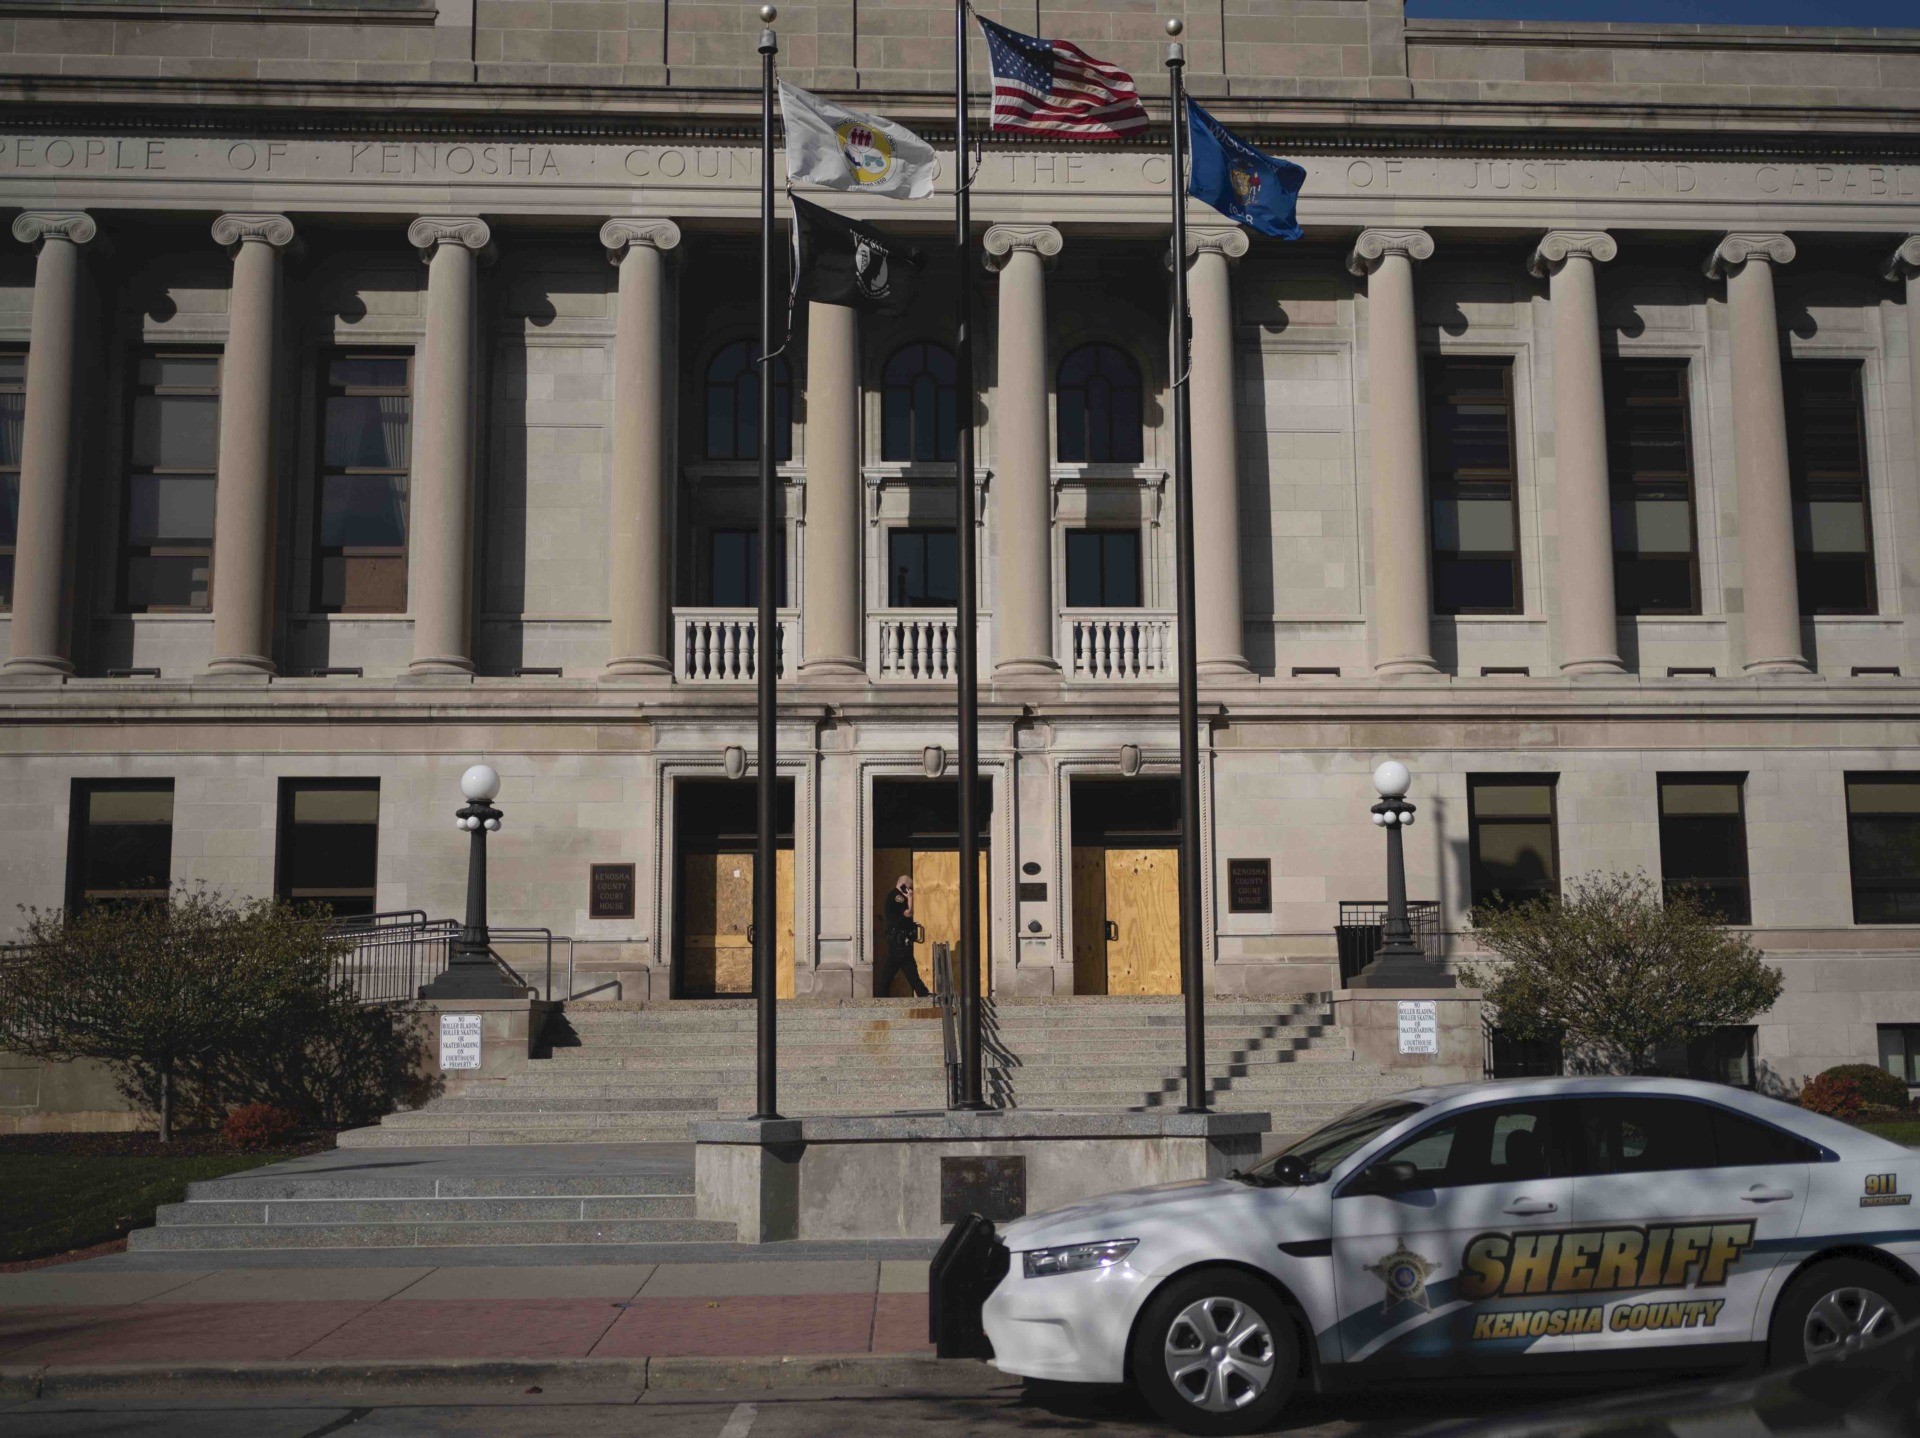 A police officer walks in front of the Kenosha County circuit court, Monday, Nov. 2, 2020, in Kenosha, Wis.. Bail was set at $2 million on Monday for a 17-year-old from Illinois accused of killing two men and wounding a third during an August protest in Kenosha, after the father of one of the victims told the court the defendant "thinks he's above the law" and would be a flight risk if freed before trial. (AP Photo/Wong Maye-E)